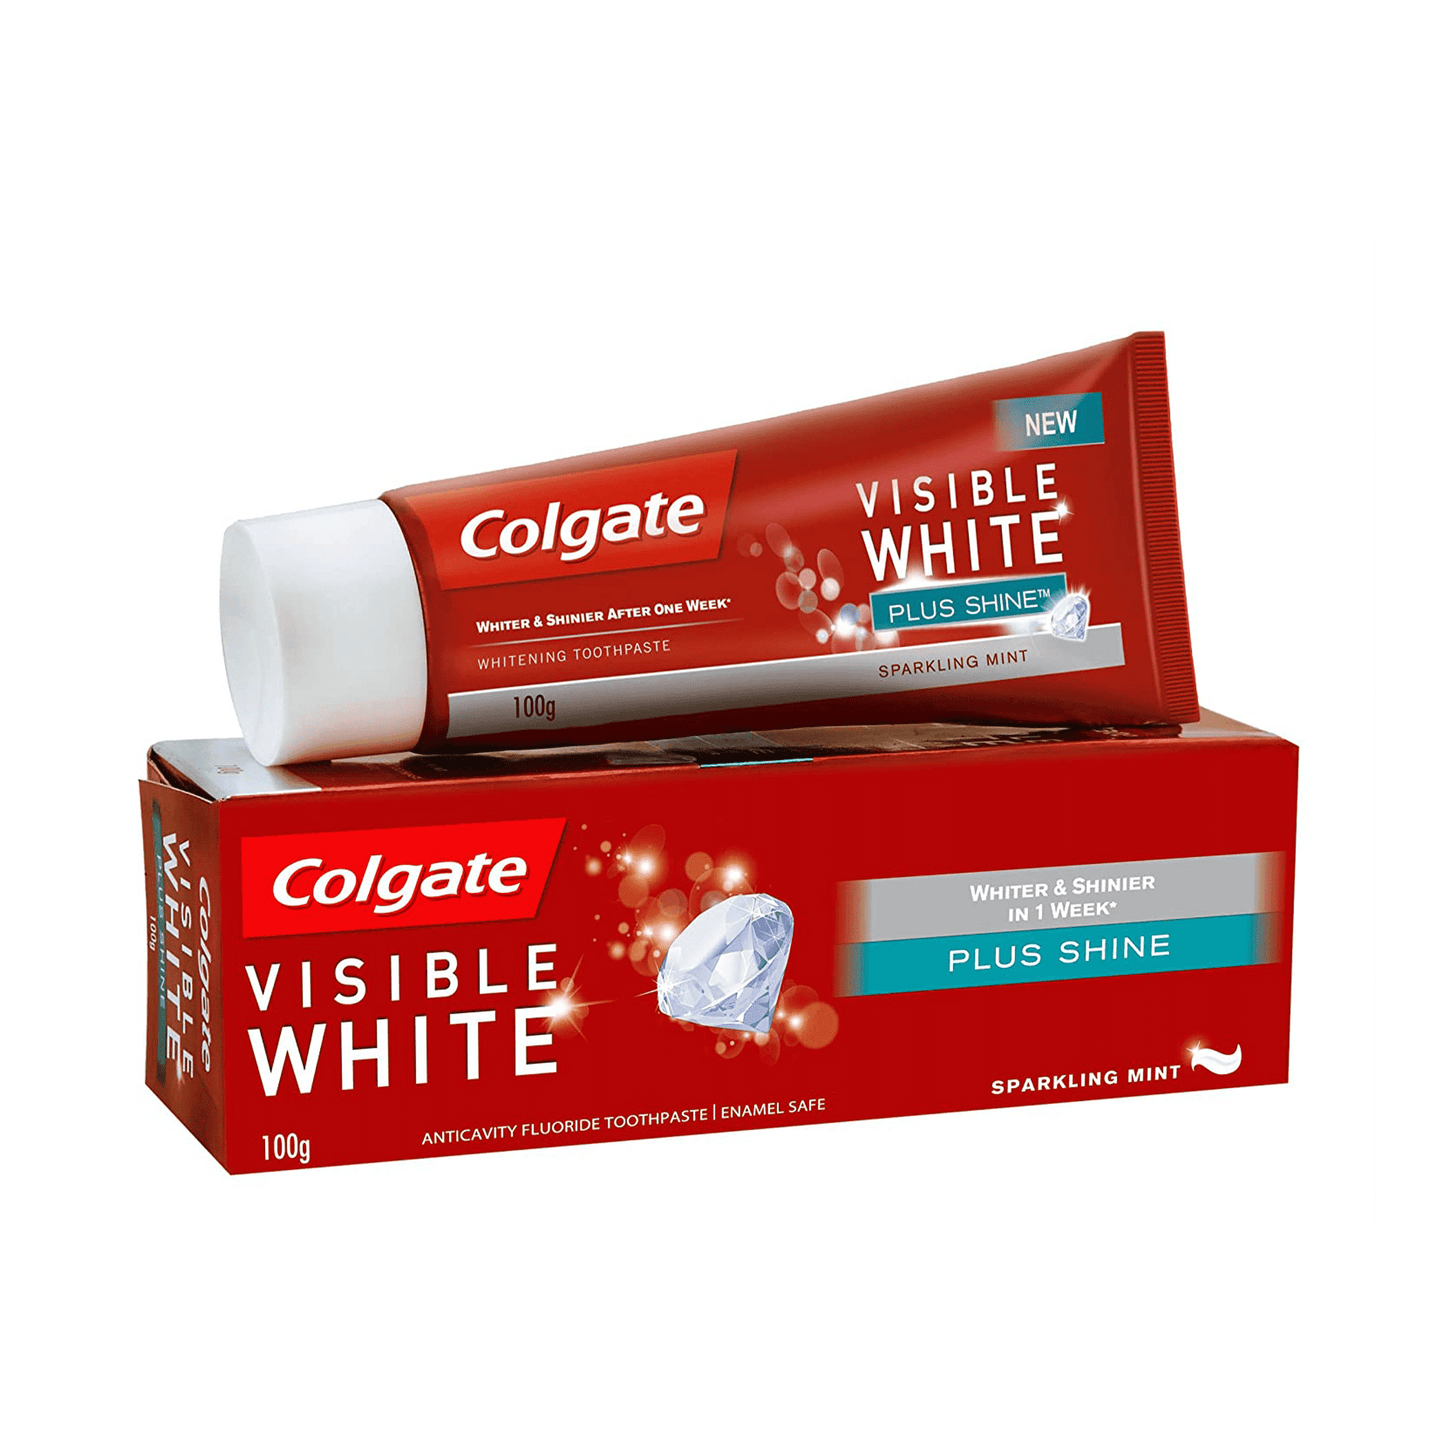 Colgate Visible White Tooth Paste.